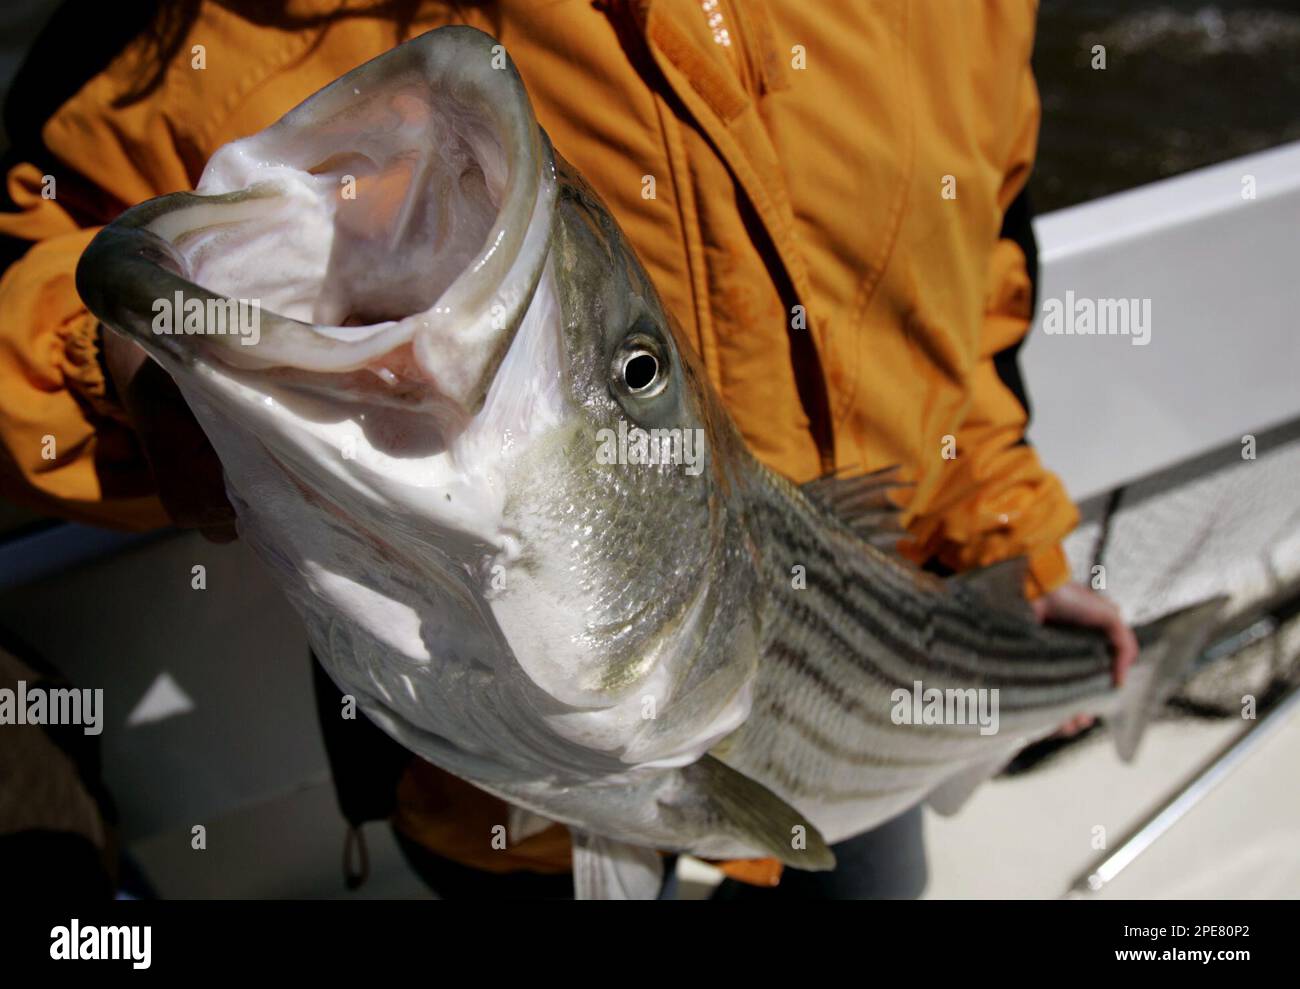 A 36-inch rockfish, better know as a striped bass, is readied to